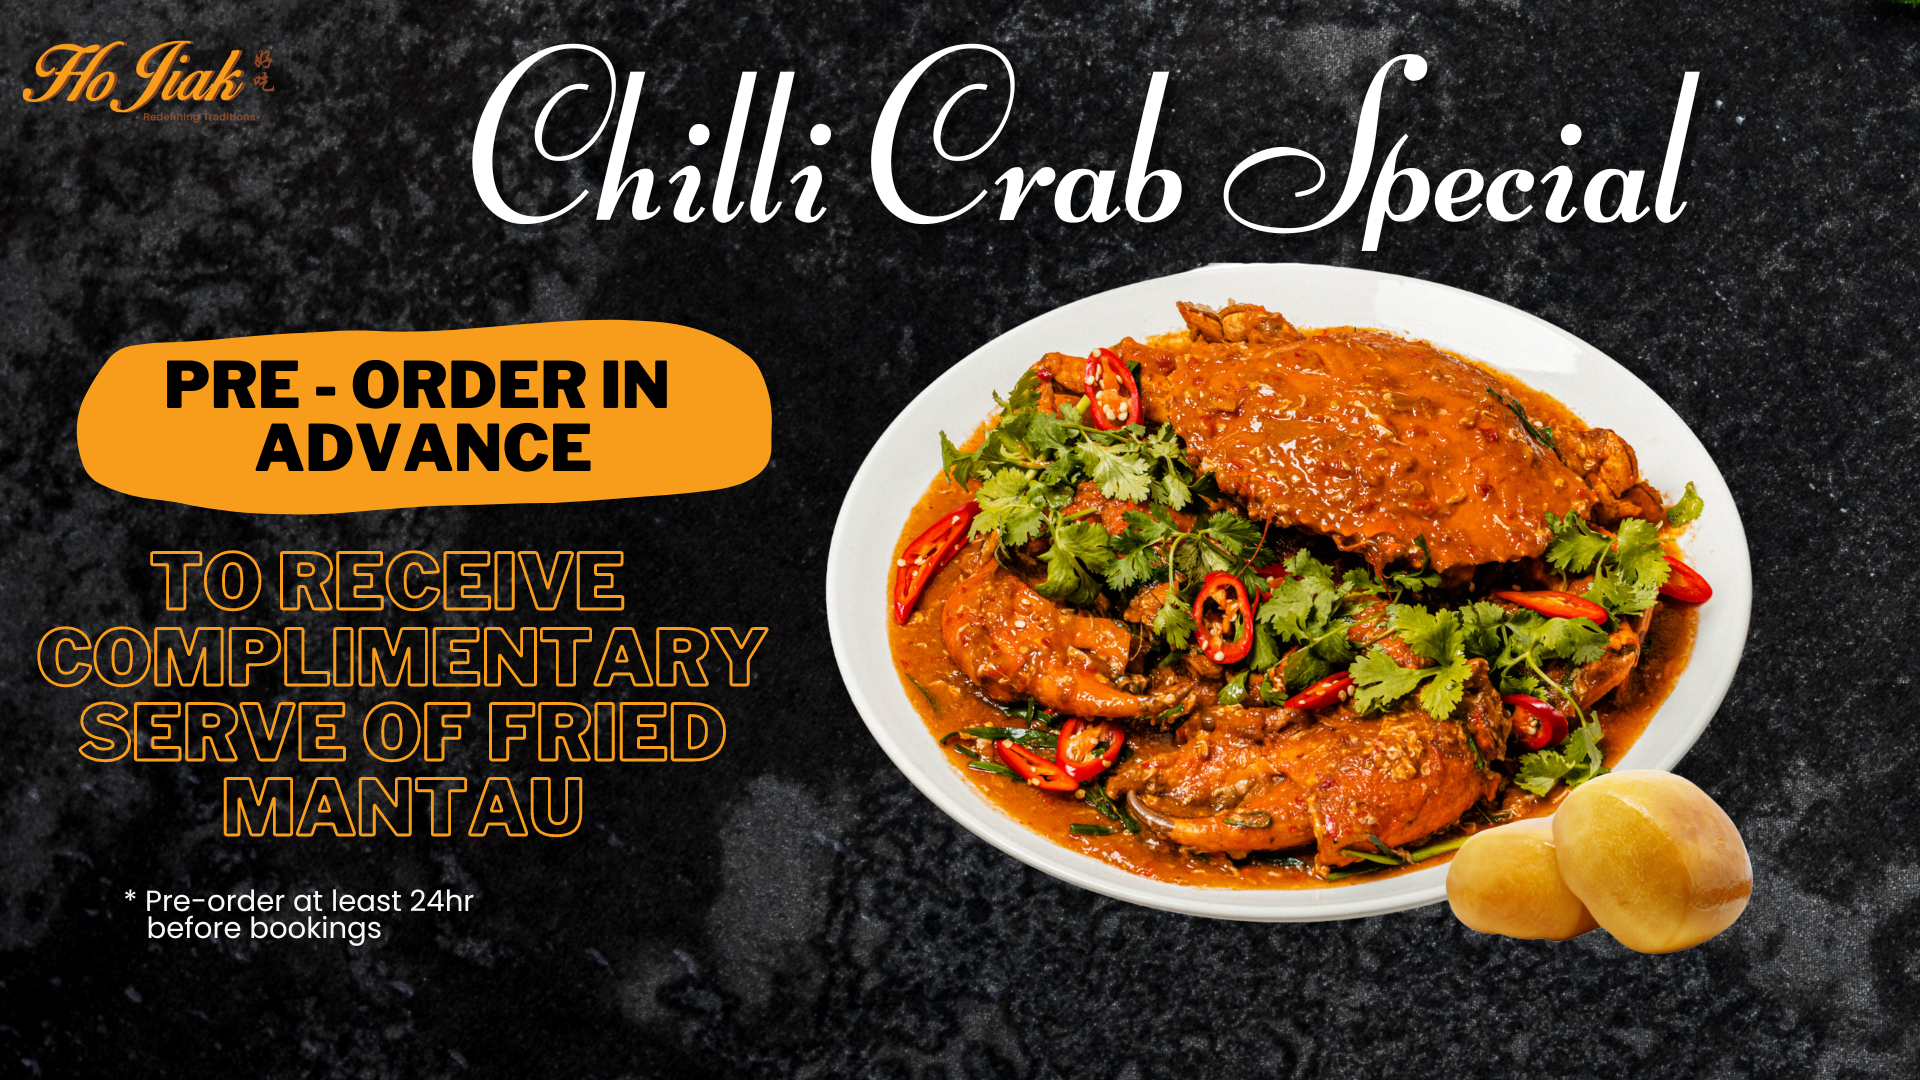 Crack into flavour paradise with our iconic Chilli Crab!Pre-order 24 hours in advance to get 4 pcs Mantau for FREE! Book Now